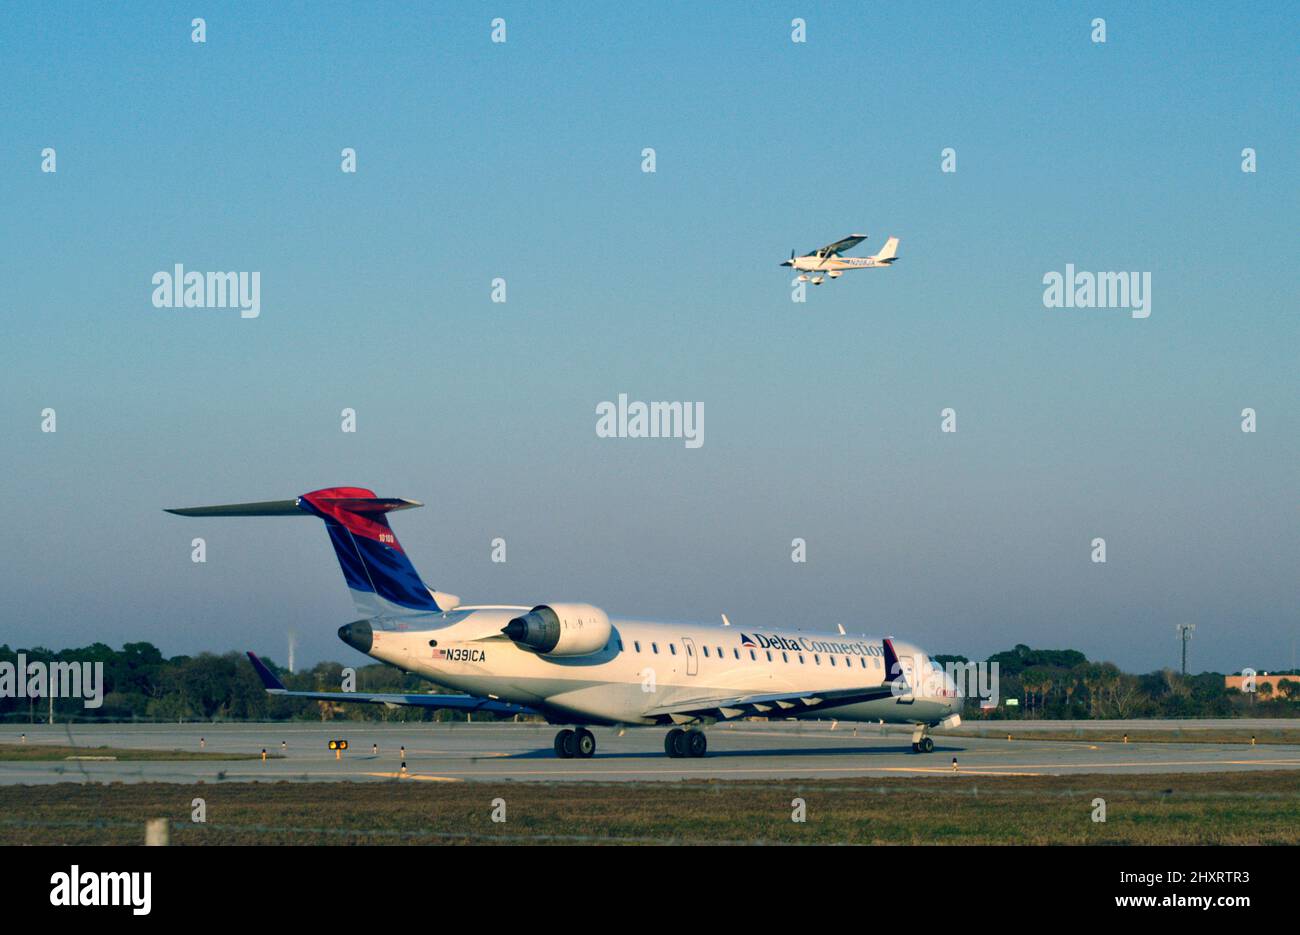 Airplane in the air -- and sharing airport space Stock Photo